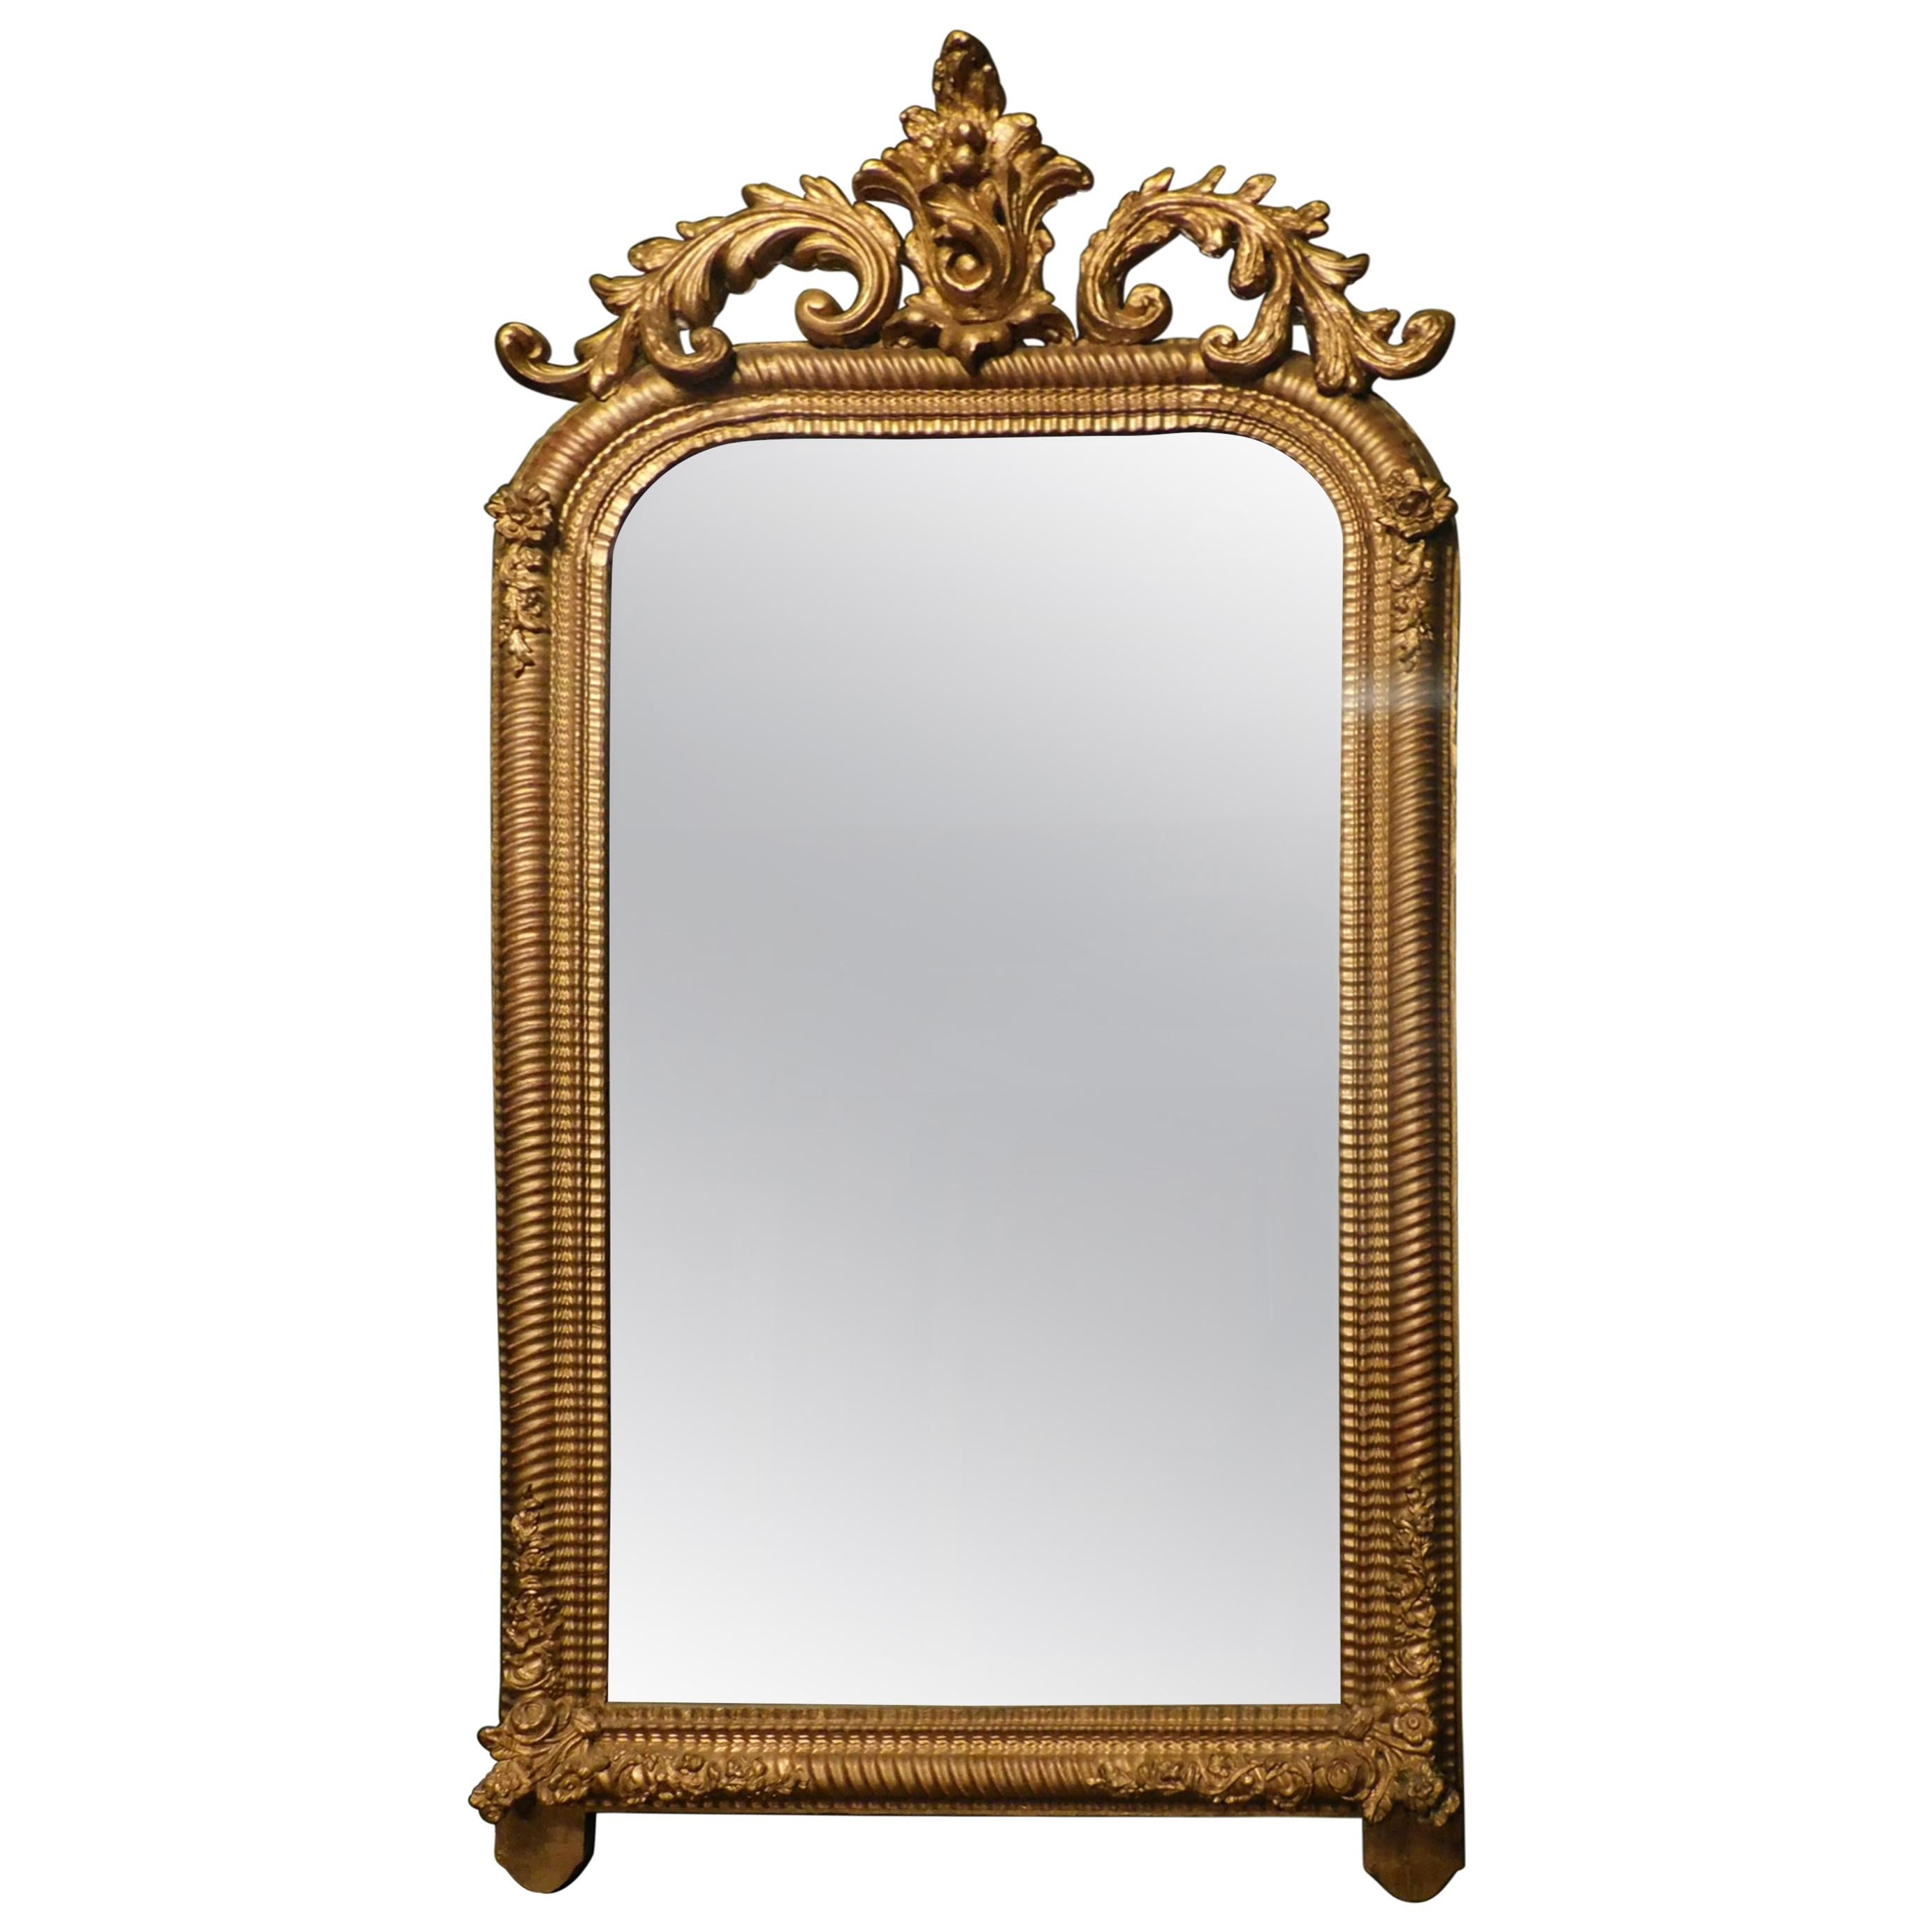 Antique Mirror with Carved and Gilded Rib, Leaves and Frames, 19th Century Italy